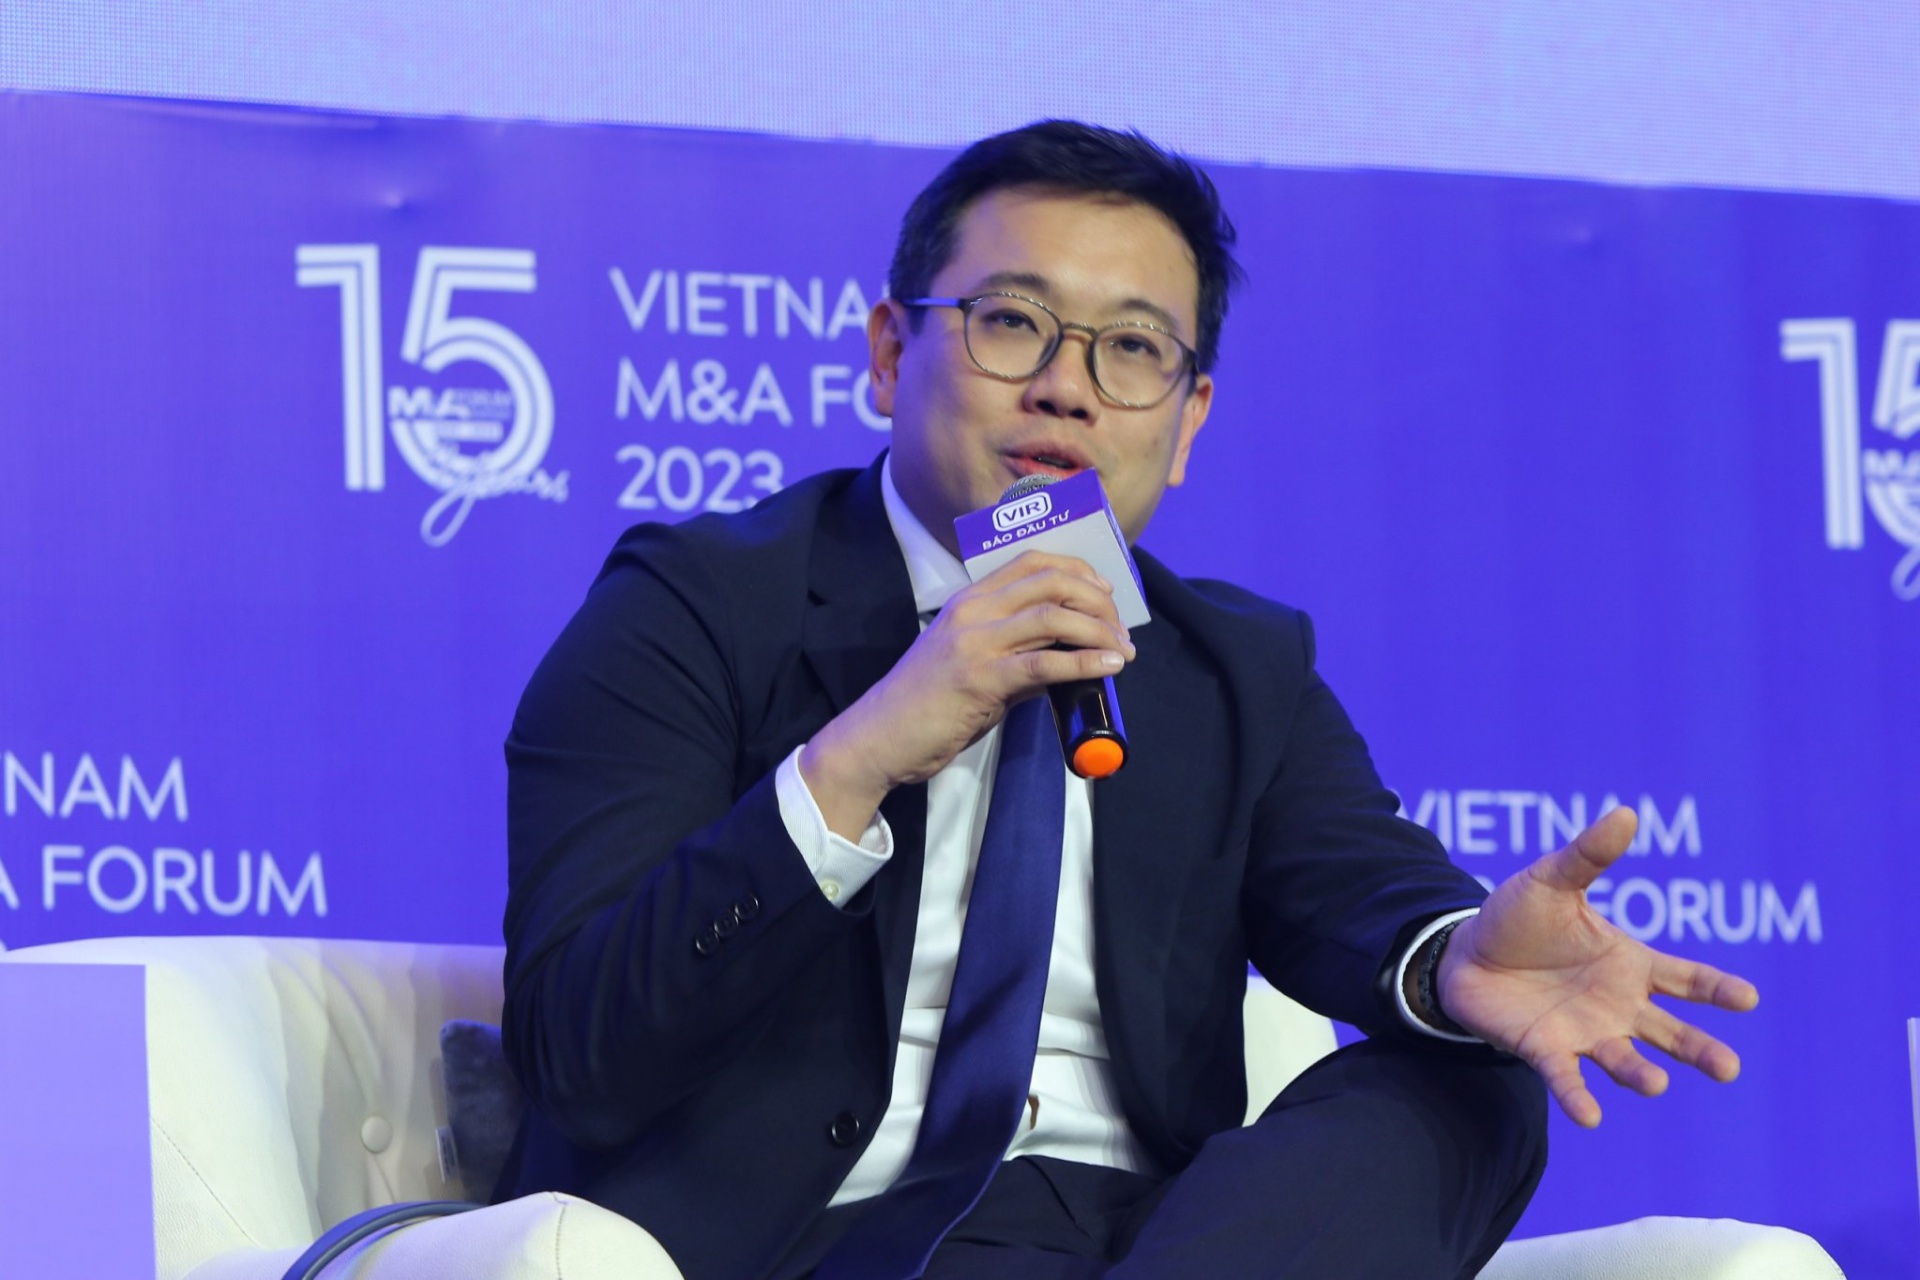 Thomson Medical Group eyes robust growth in Vietnam through strategic M&A initiatives